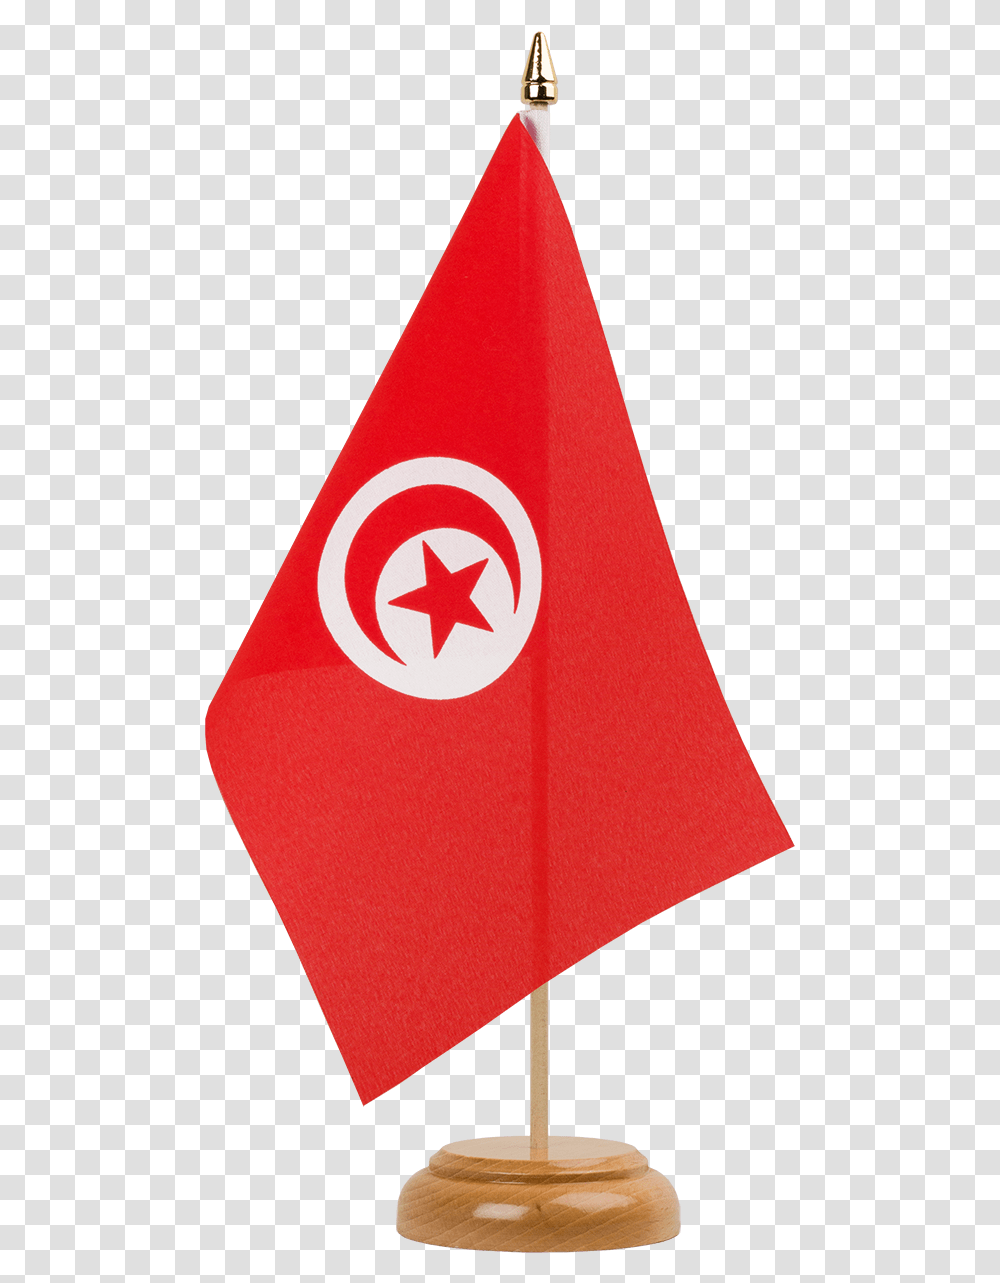 Tunisia Table Flag Wooden South Africa Table Flag, Triangle, Cone, Star Symbol Transparent Png